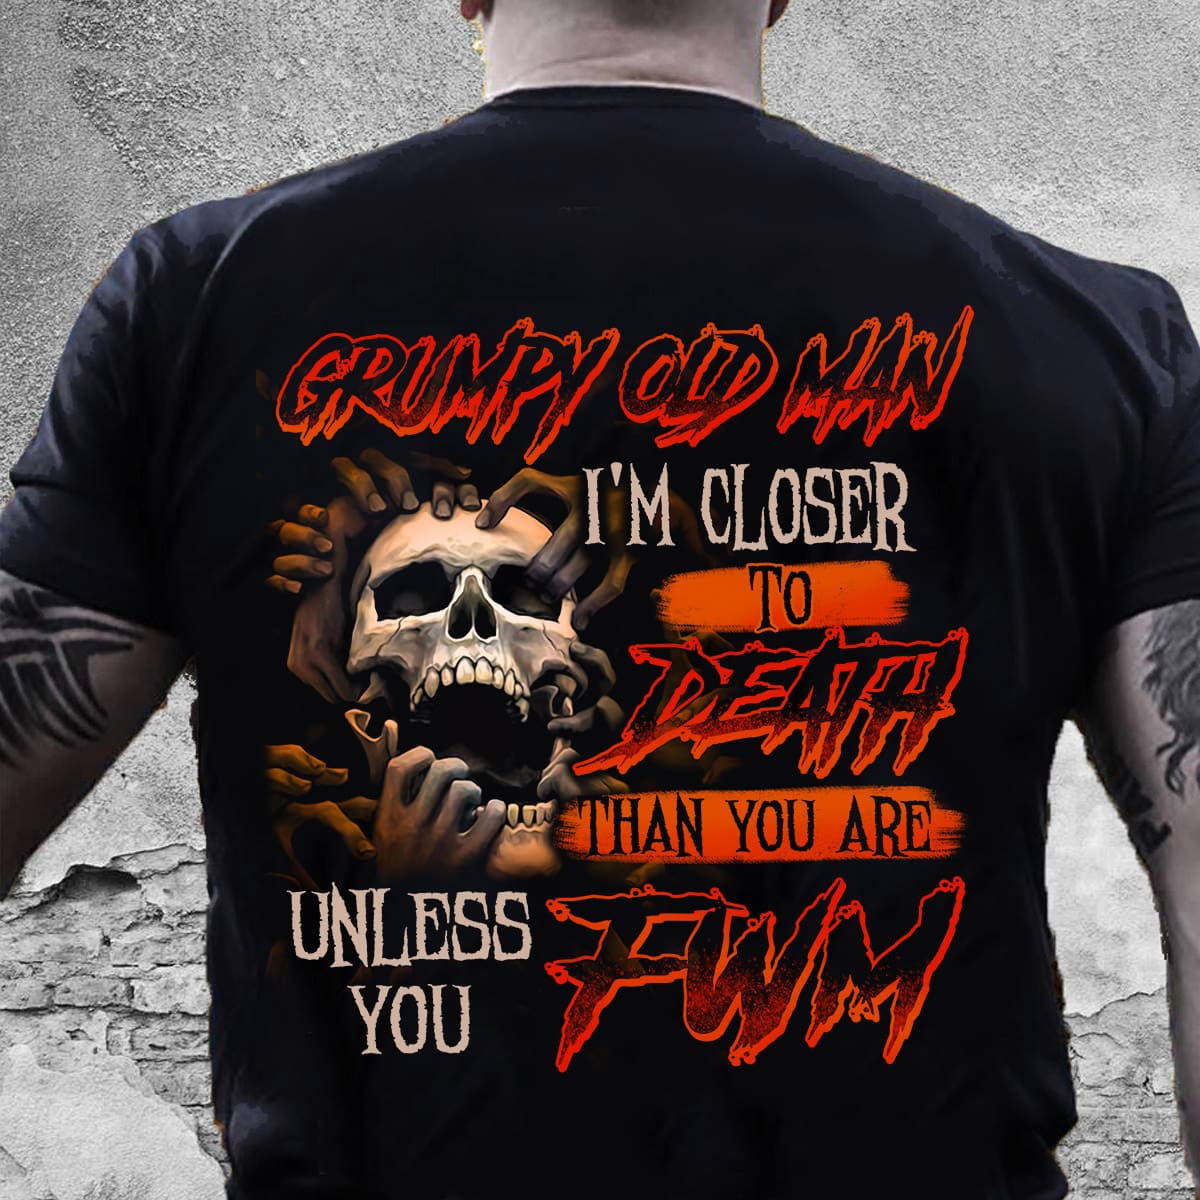 Grumpy old man I'm closer to death than you are unless you Fwm - Devil of the death